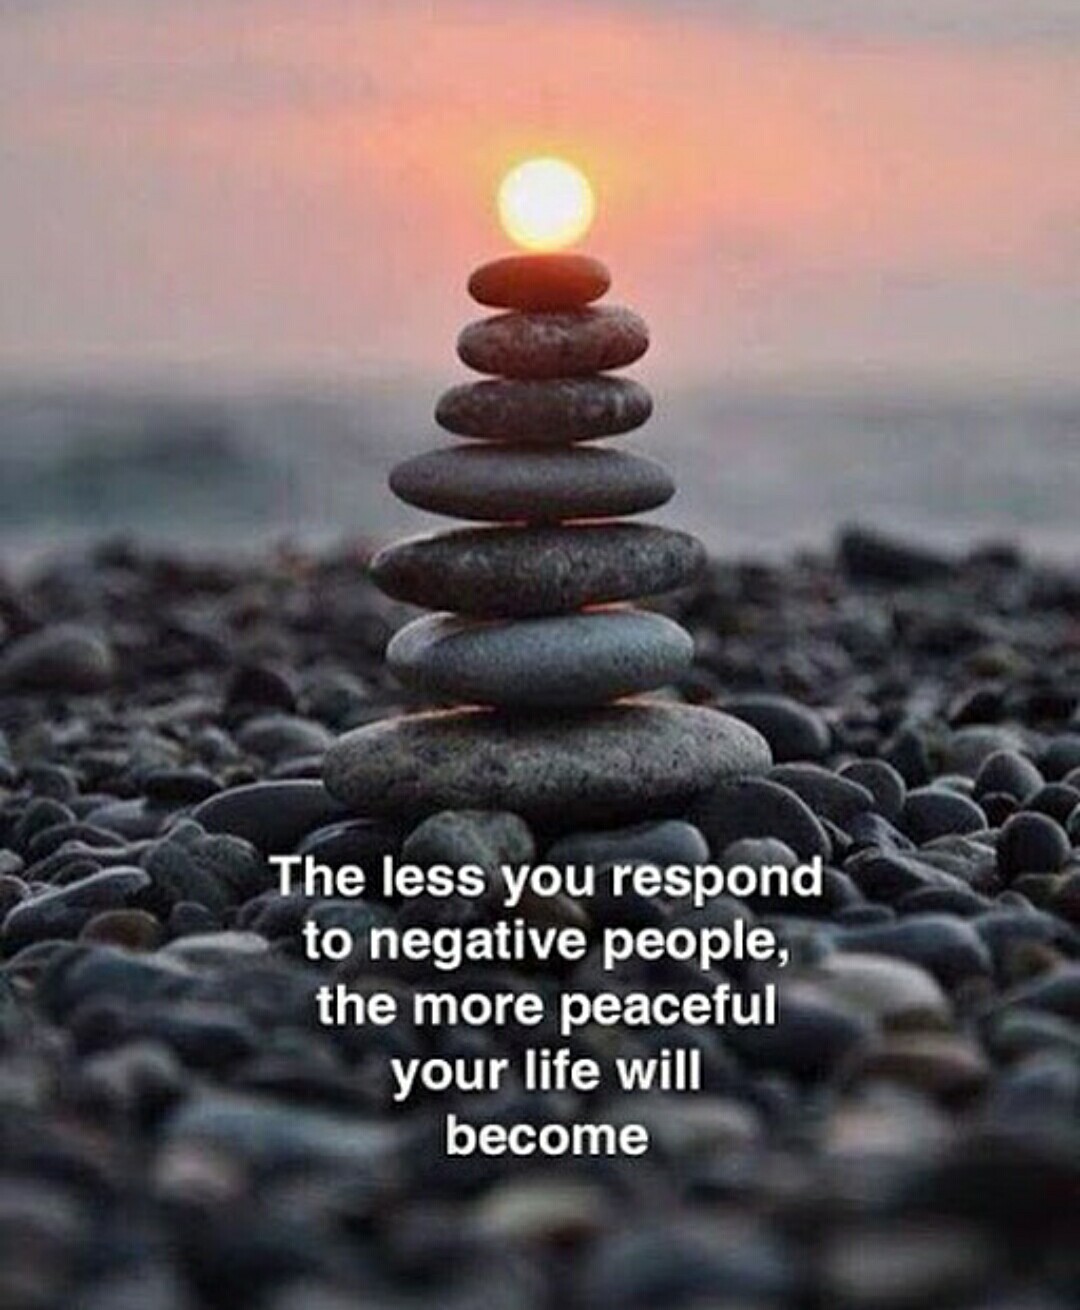 Don't Let Other's Negativity Bring You Down